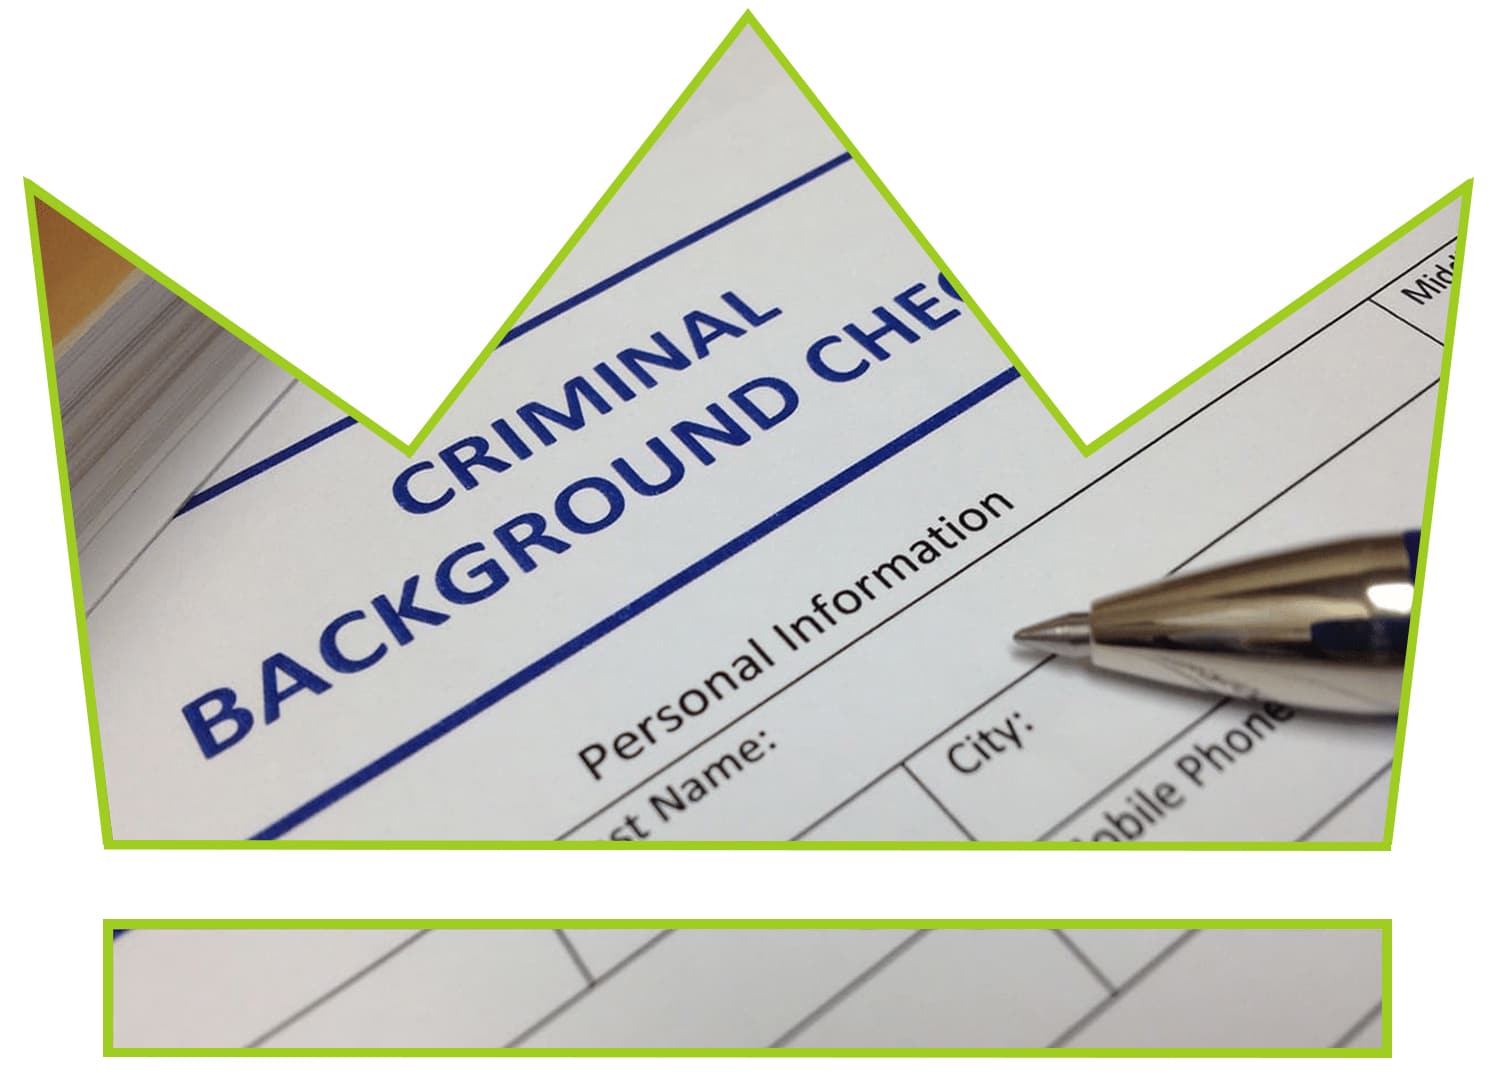 Looking for a Background Checks Merchant Account?